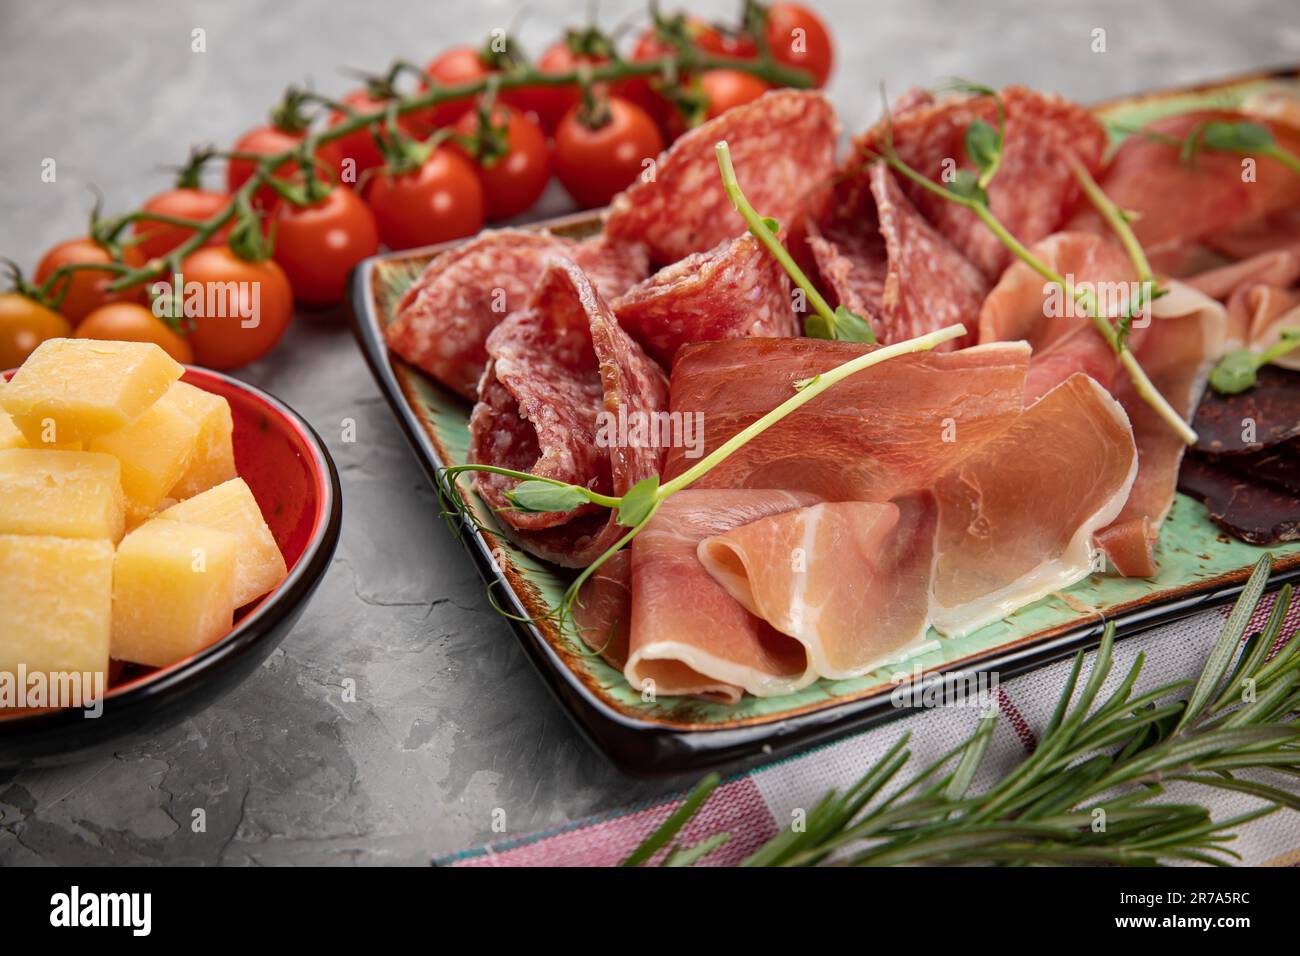 A wooden tray featuring a selection of cured meats, cheeses and fresh fruits, served on a white plate Stock Photo